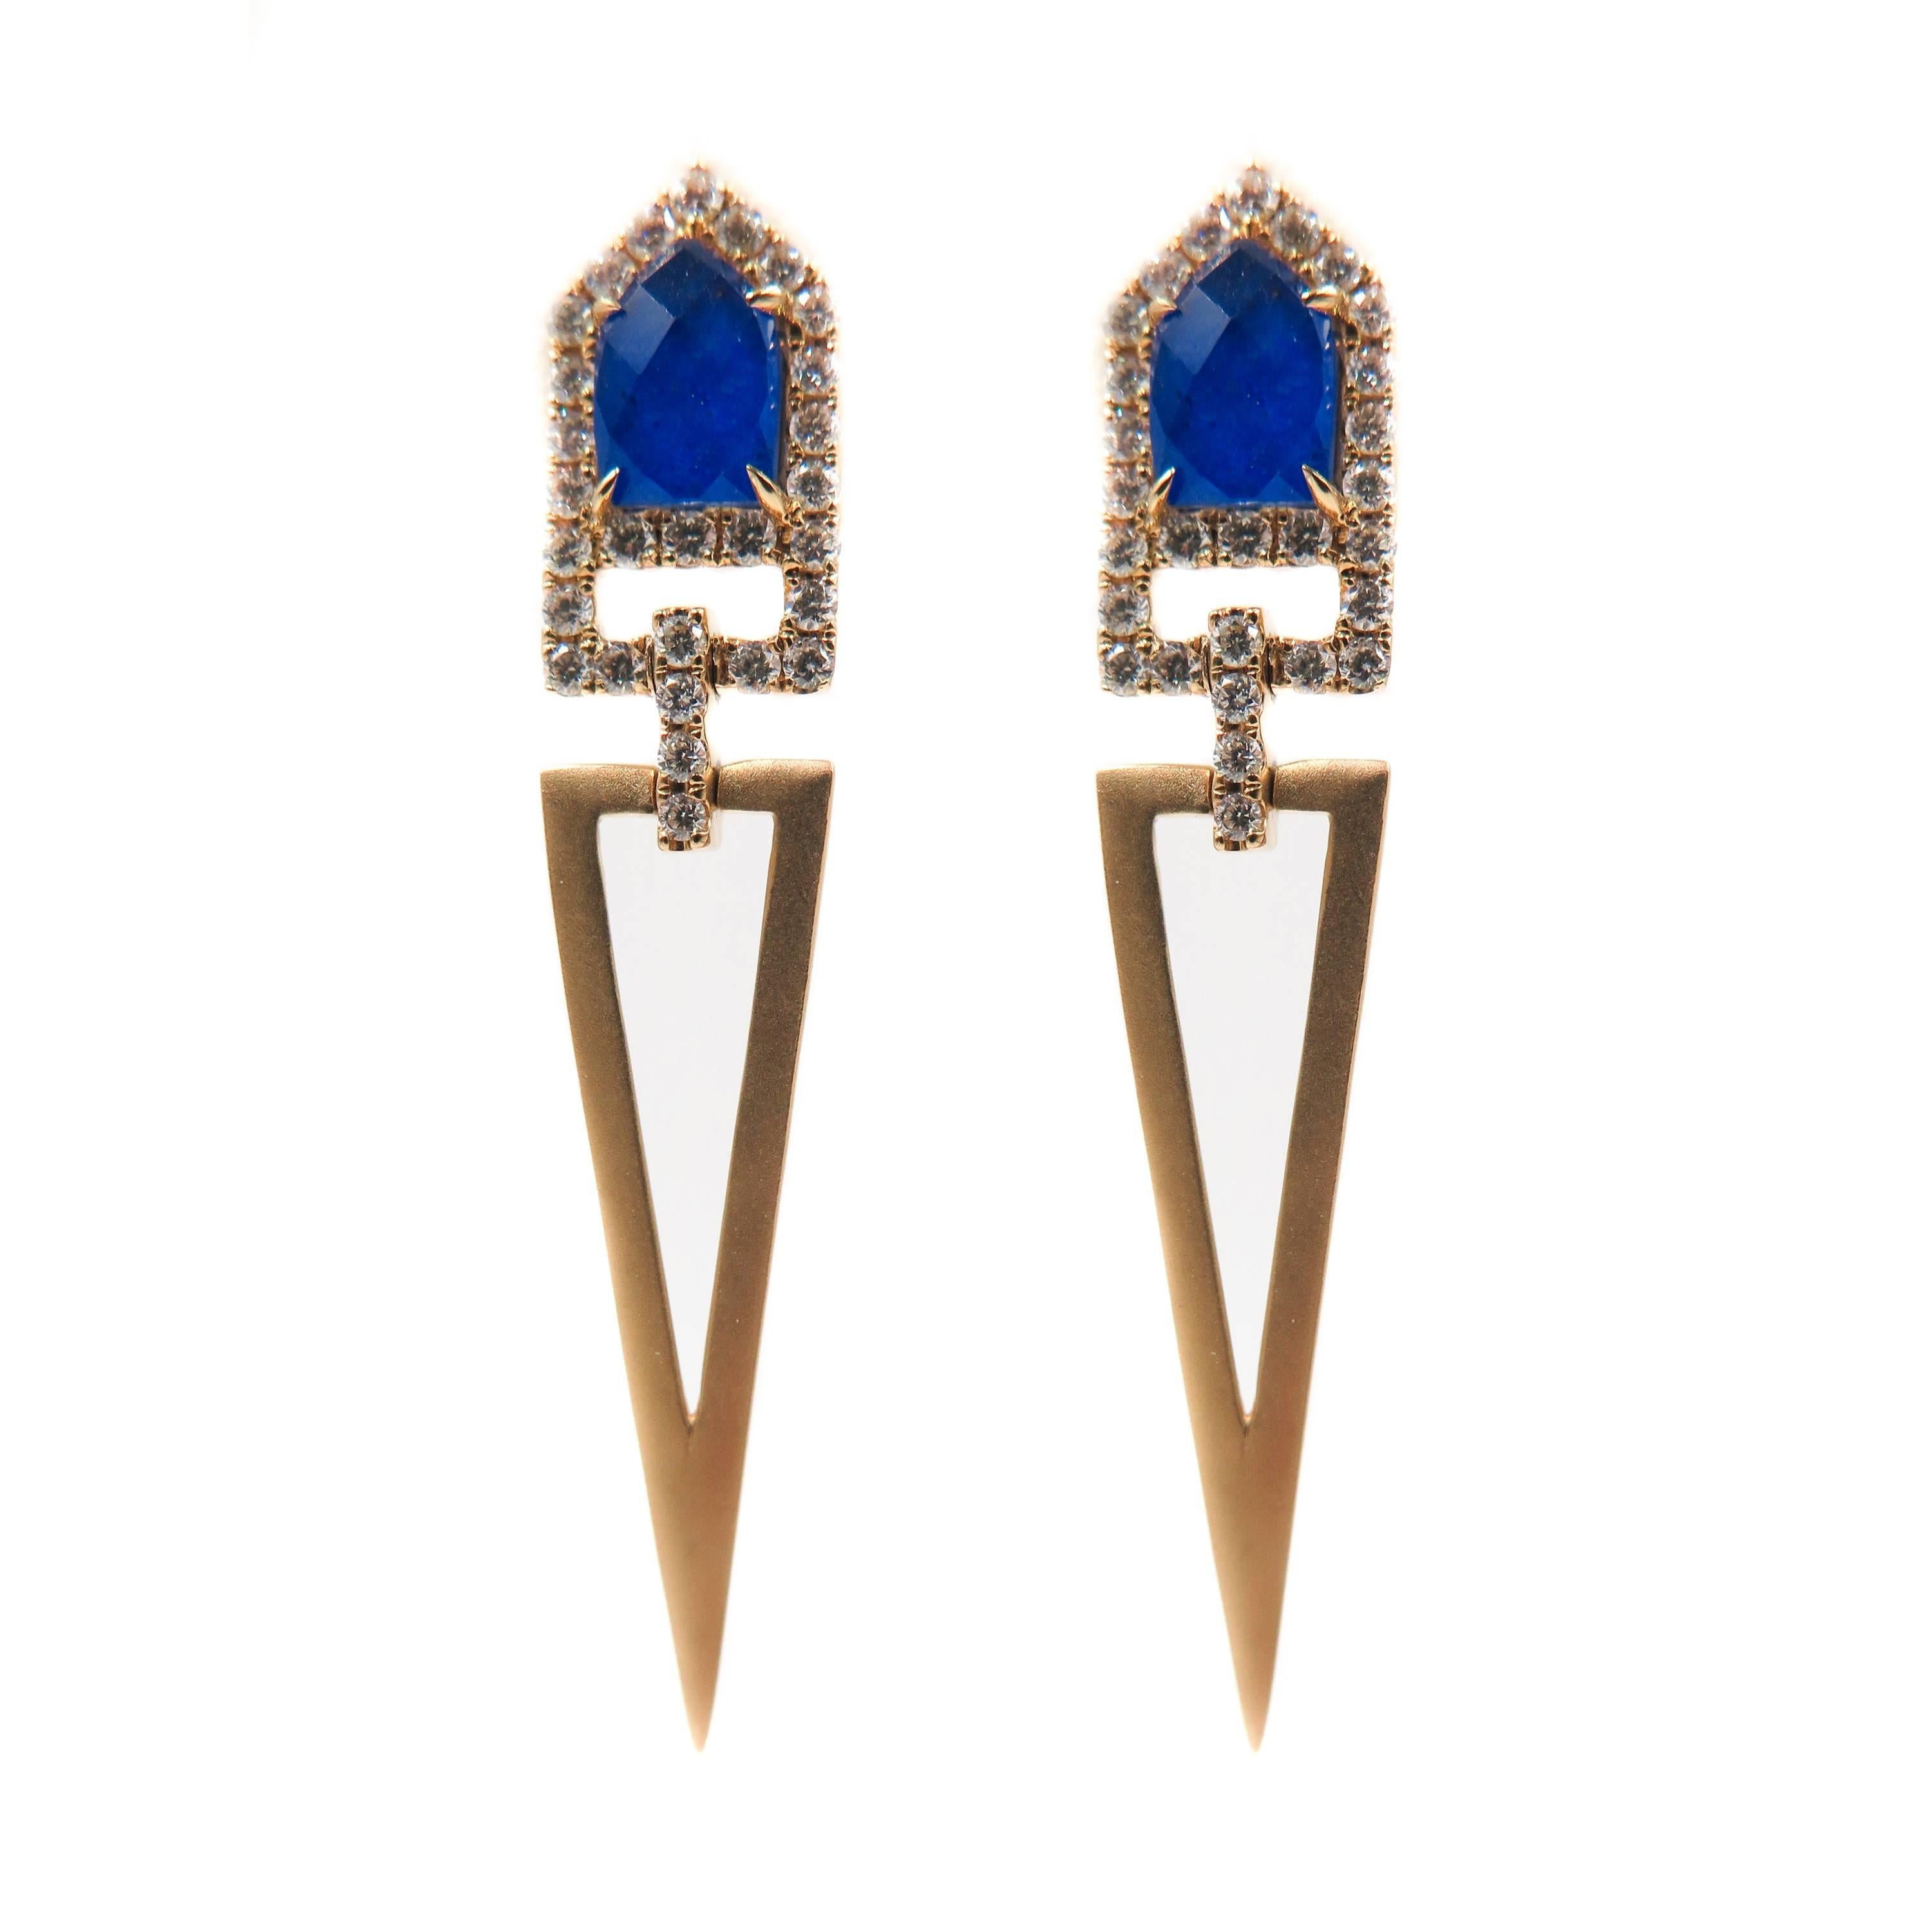 This gorgeous Lapis and Diamond Drop Earrings are the result of overlapping a beautiful faceted clear quartz over a deep blue lapis lazuli, creating that shimmering and eye catching effect. Framed by 56 white round brilliant cut diamonds, weighing